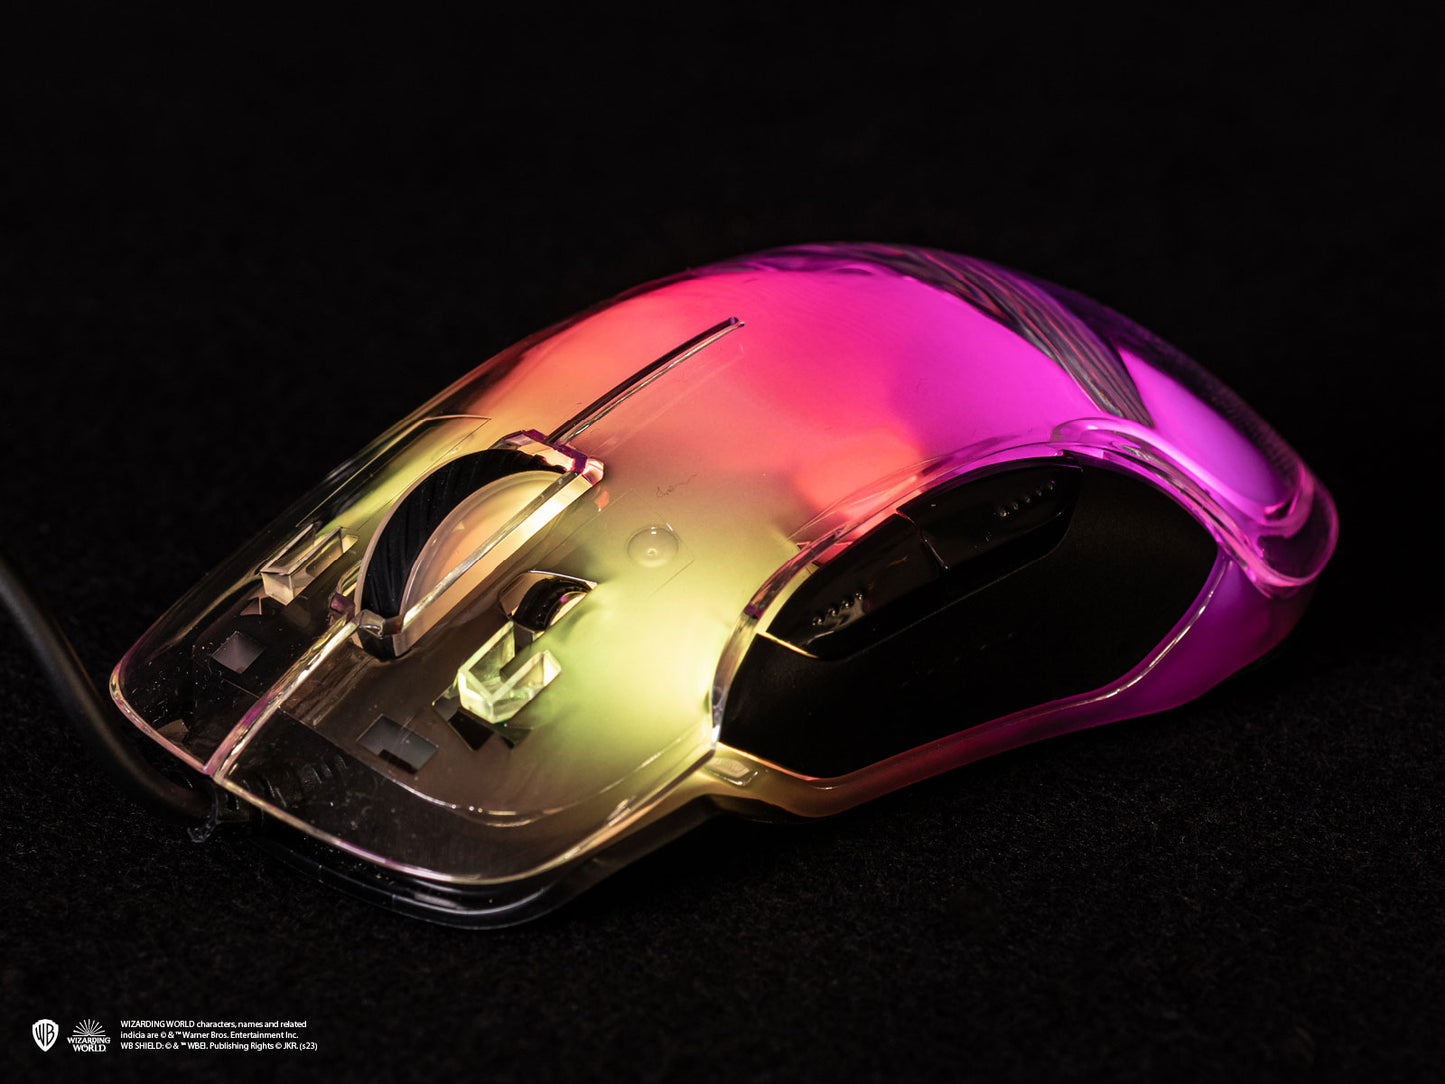 Harry Potter - Wired RGB Lightweight Gaming Mouse